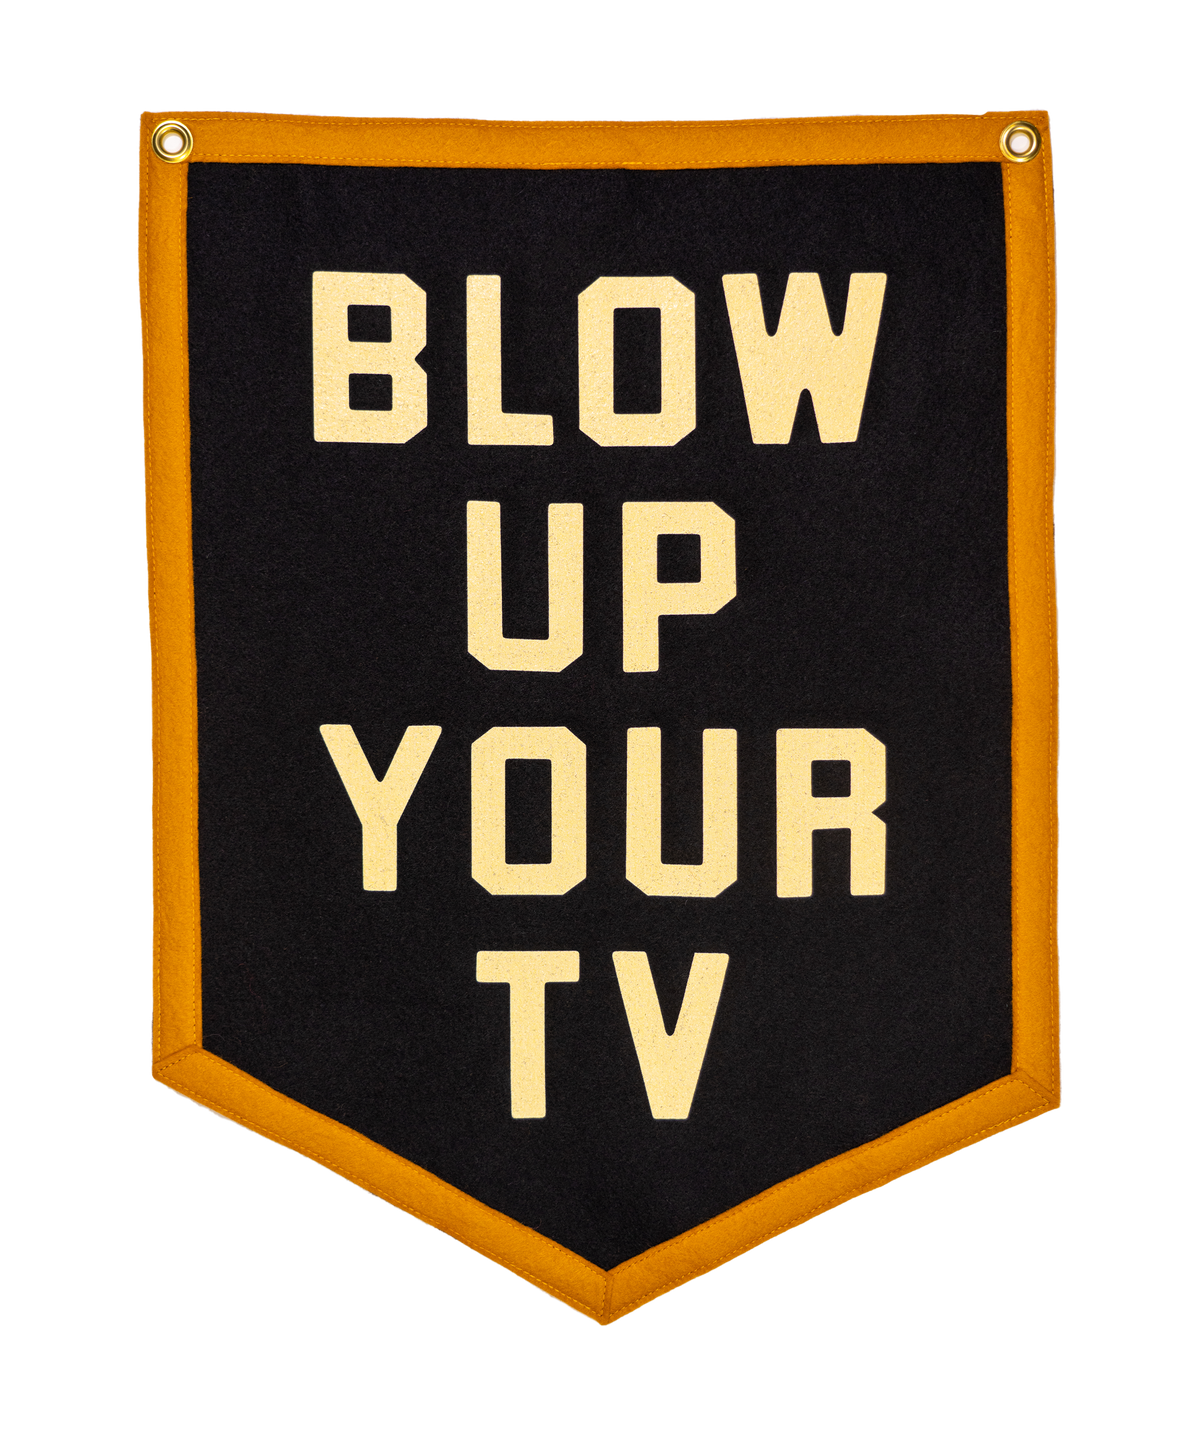 https://www.oxfordpennant.shop/wp-content/uploads/1699/50/all-our-valued-clients-will-receive-a-fair-price-and-excellent-customer-service-from-blow-up-your-tv-camp-flag-john-prine-x-oxford-pennant-oxford-pennant-factory-shop_0.png